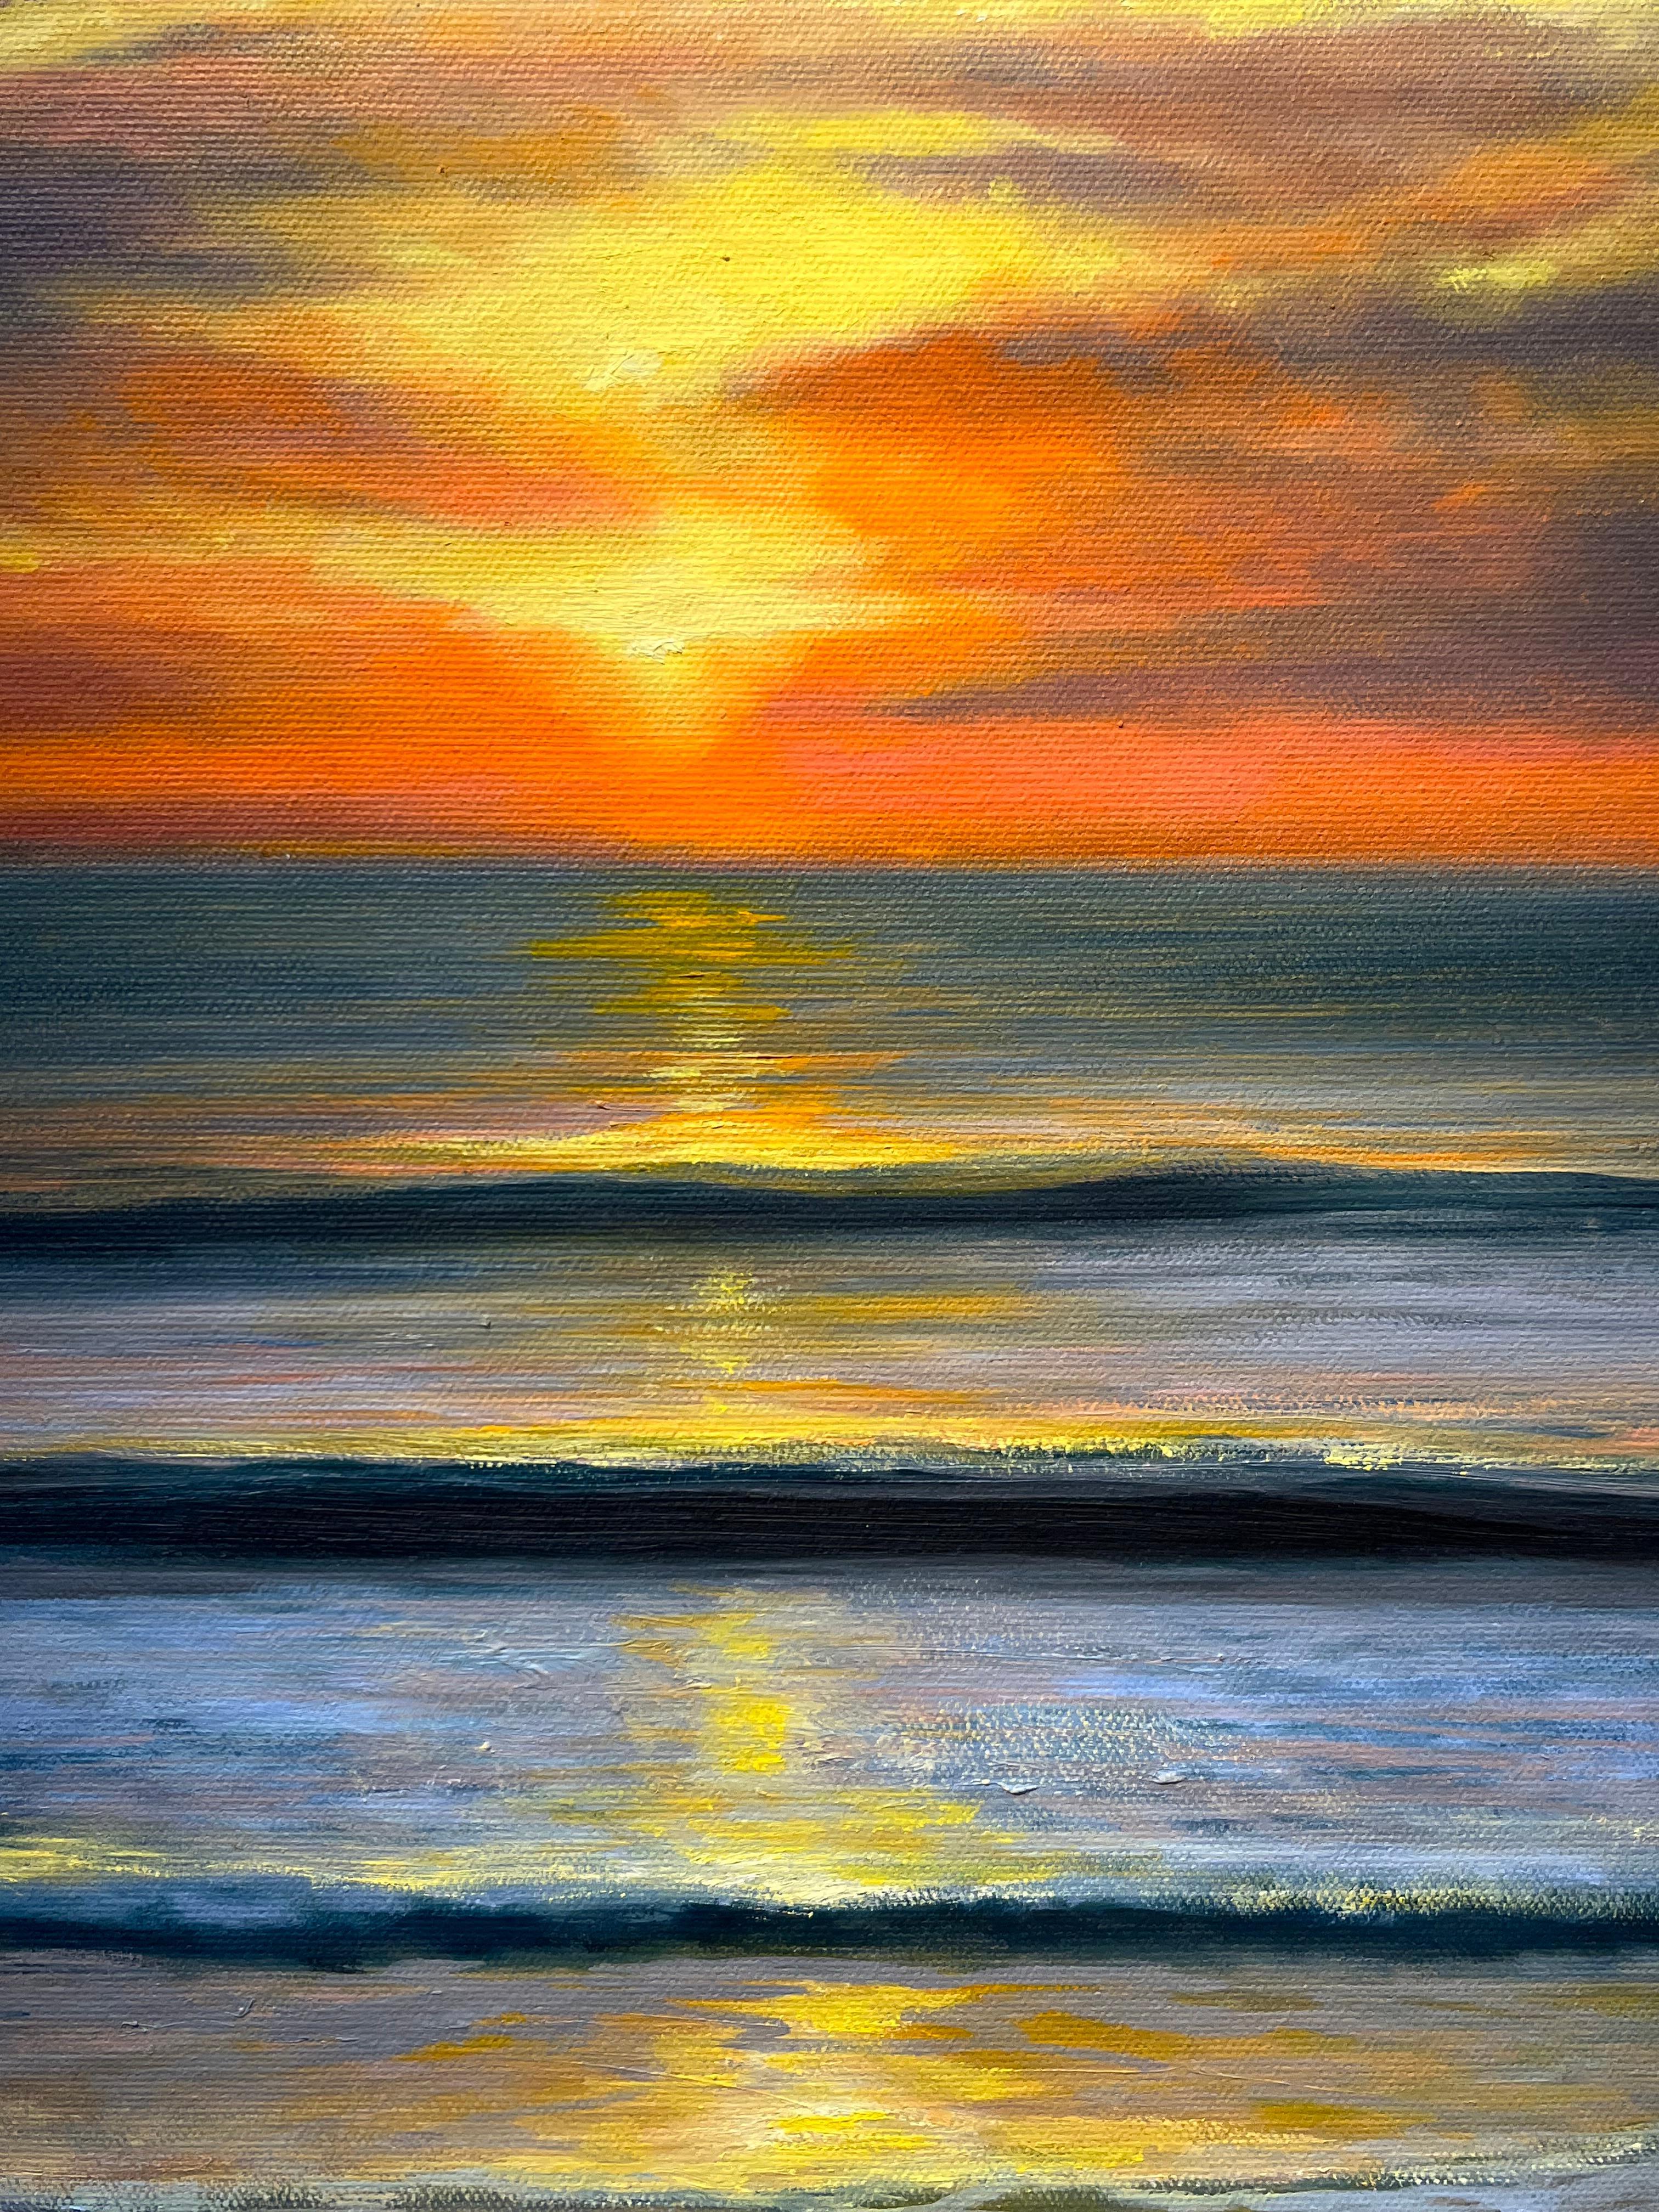 In Joanne Parent's captivating seascape masterpiece titled 